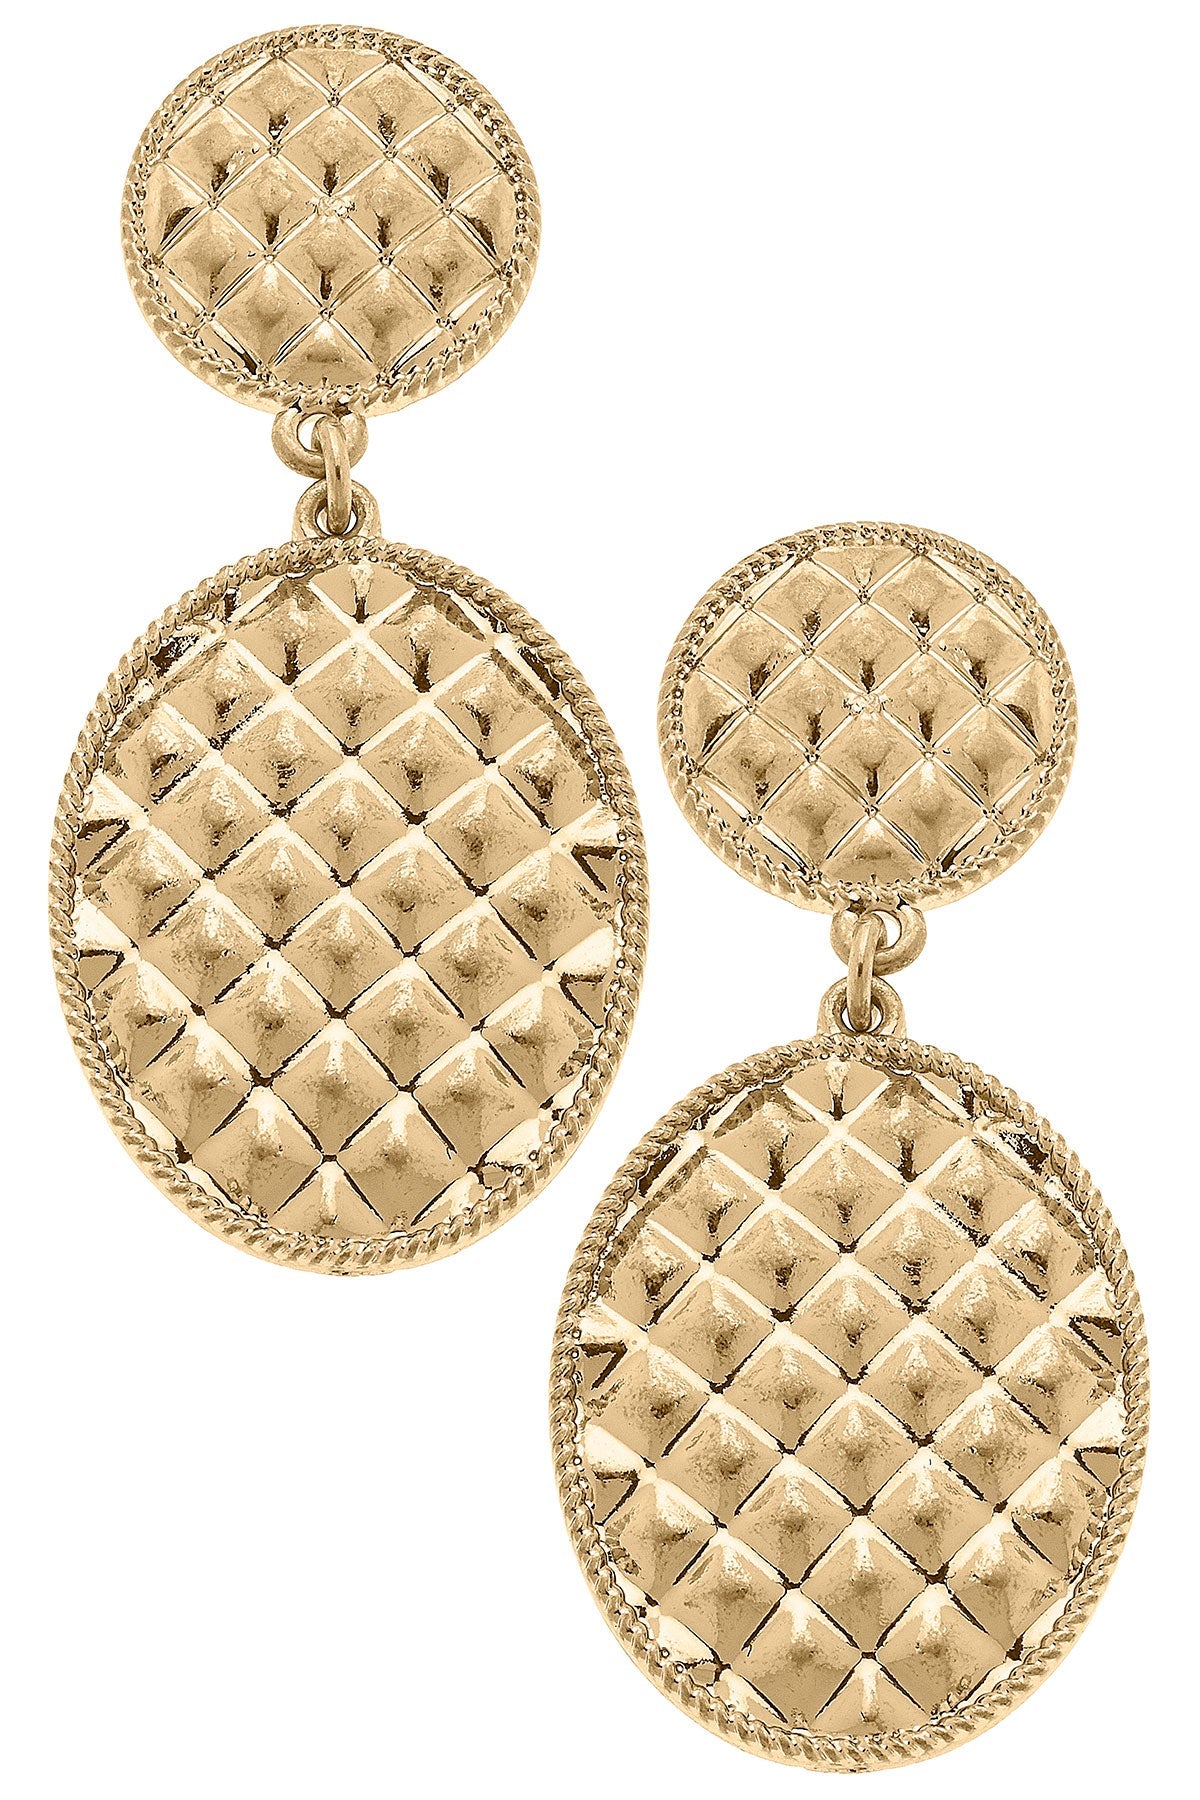 Christine Quilted Metal Oval Drop Earrings in Worn Gold